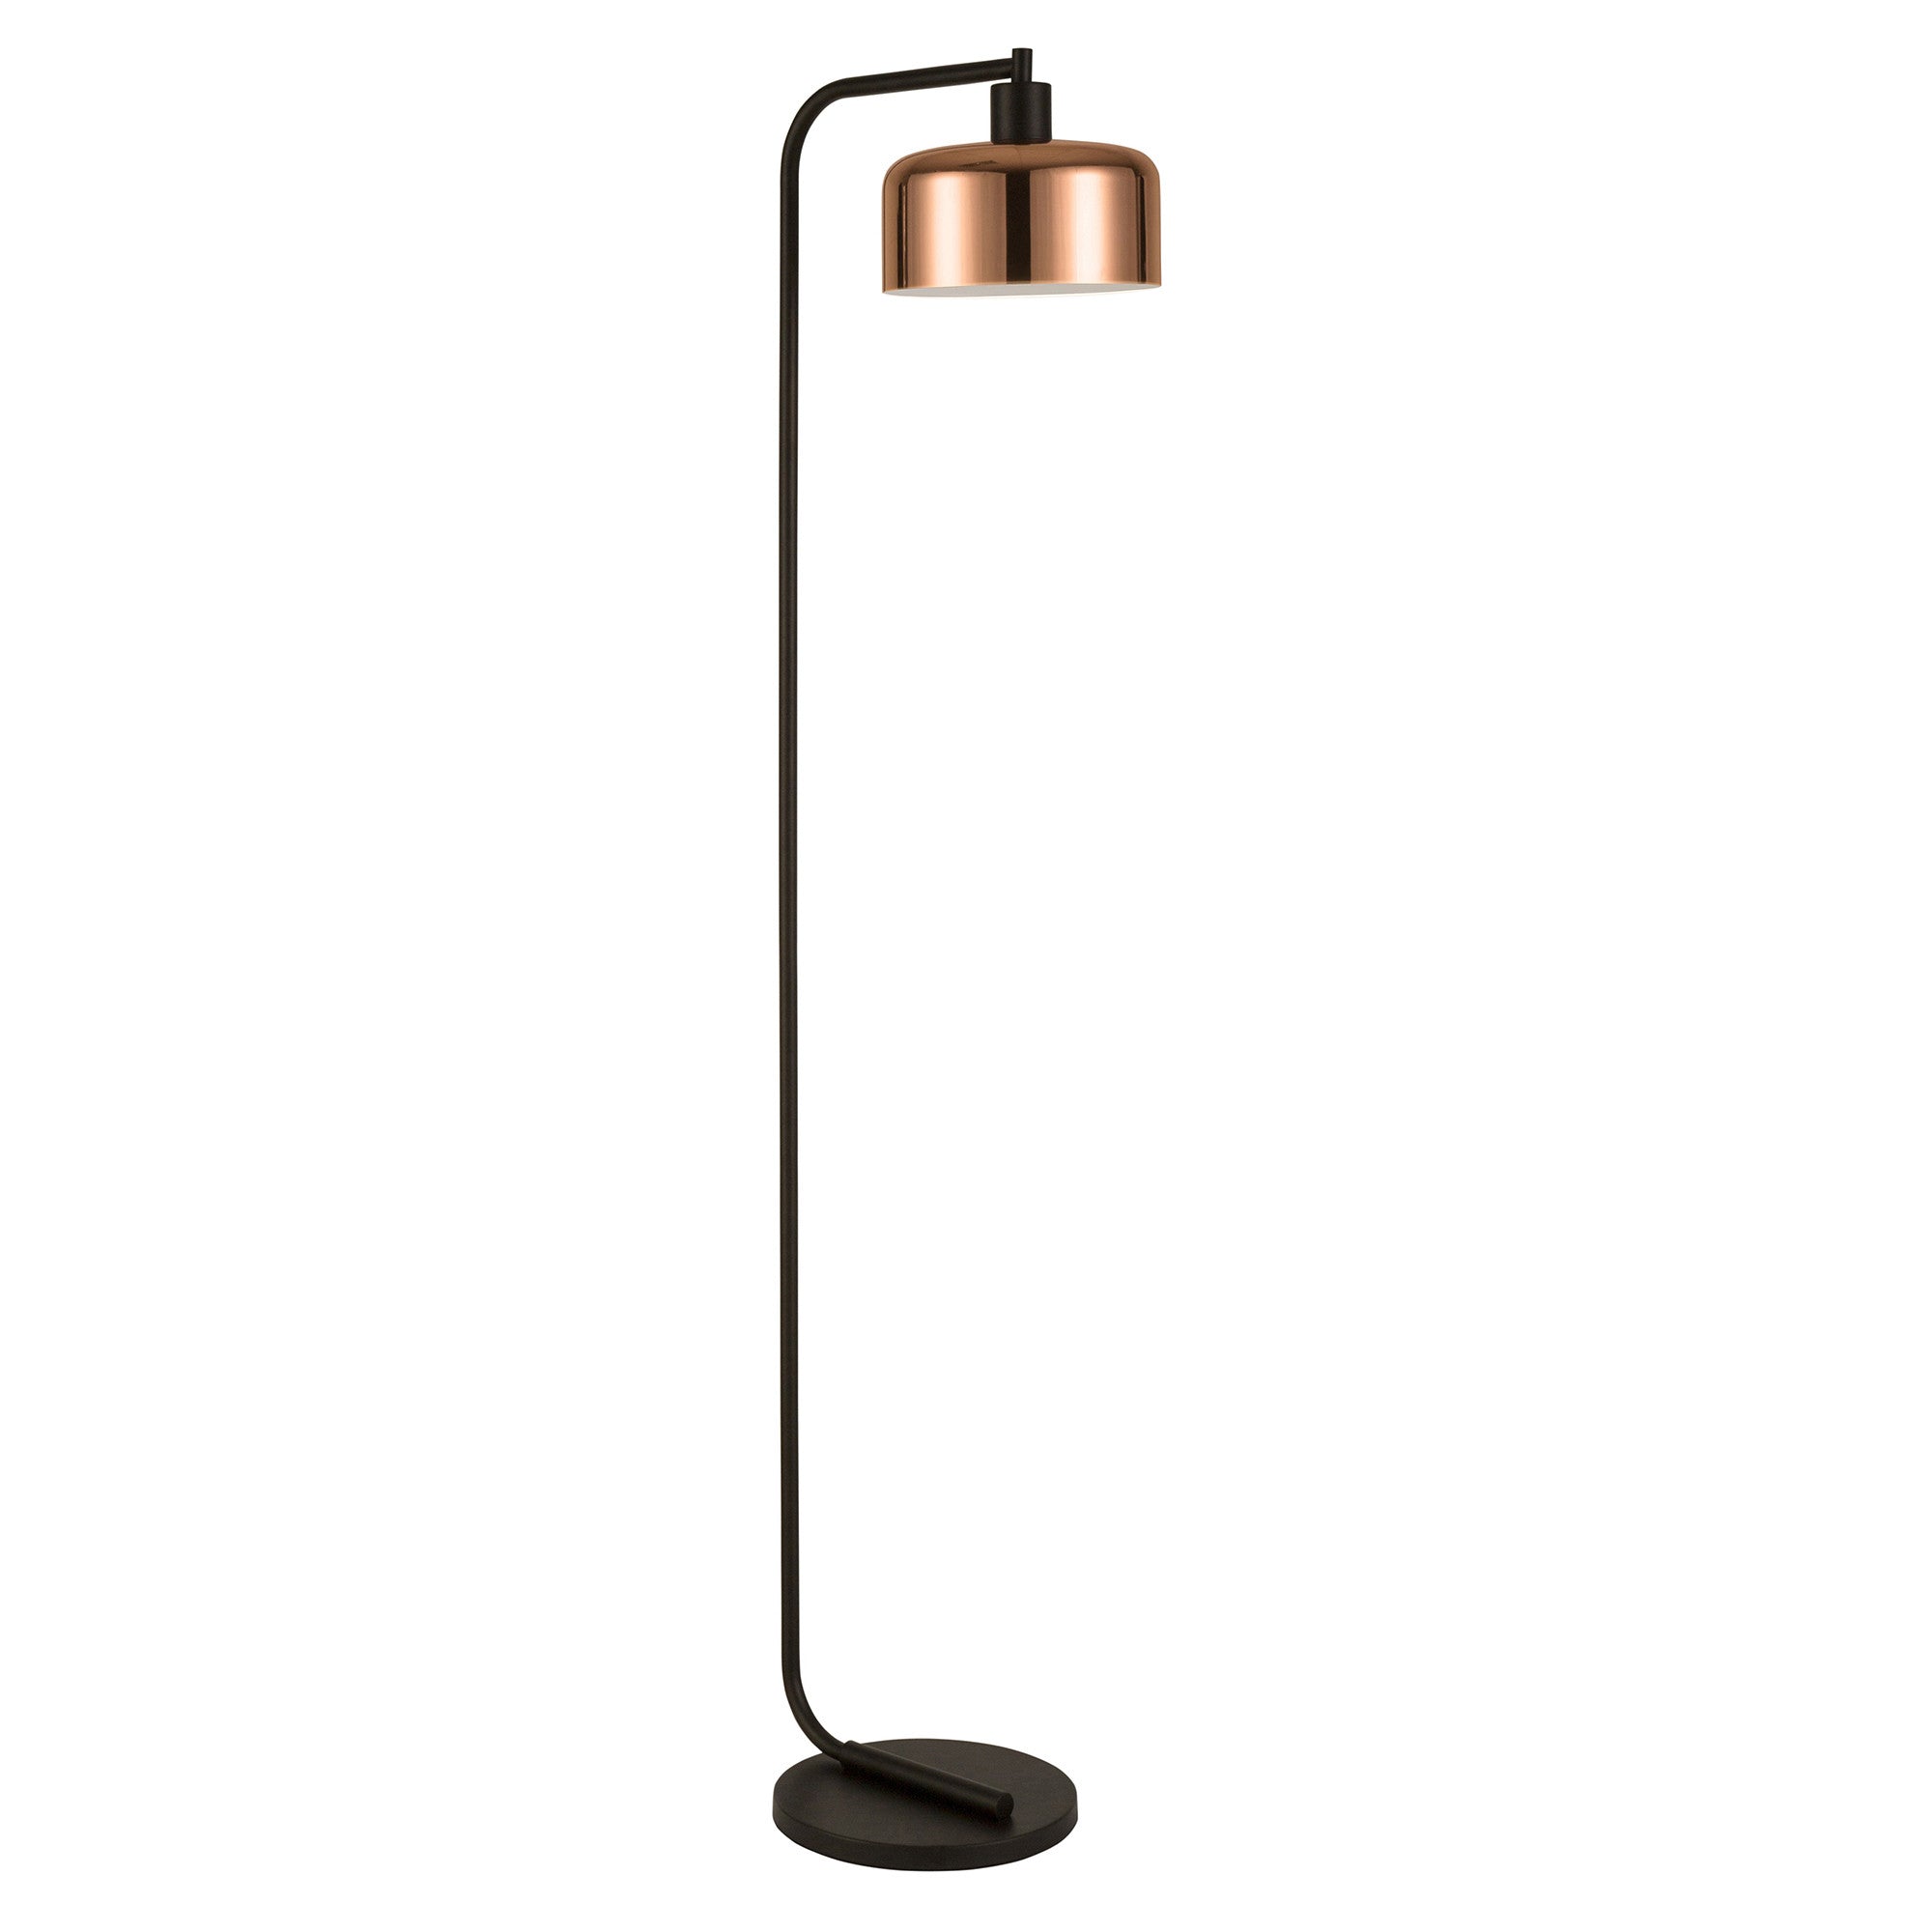 57" Black Arched Floor Lamp With Copper No Pattern Bell Shade